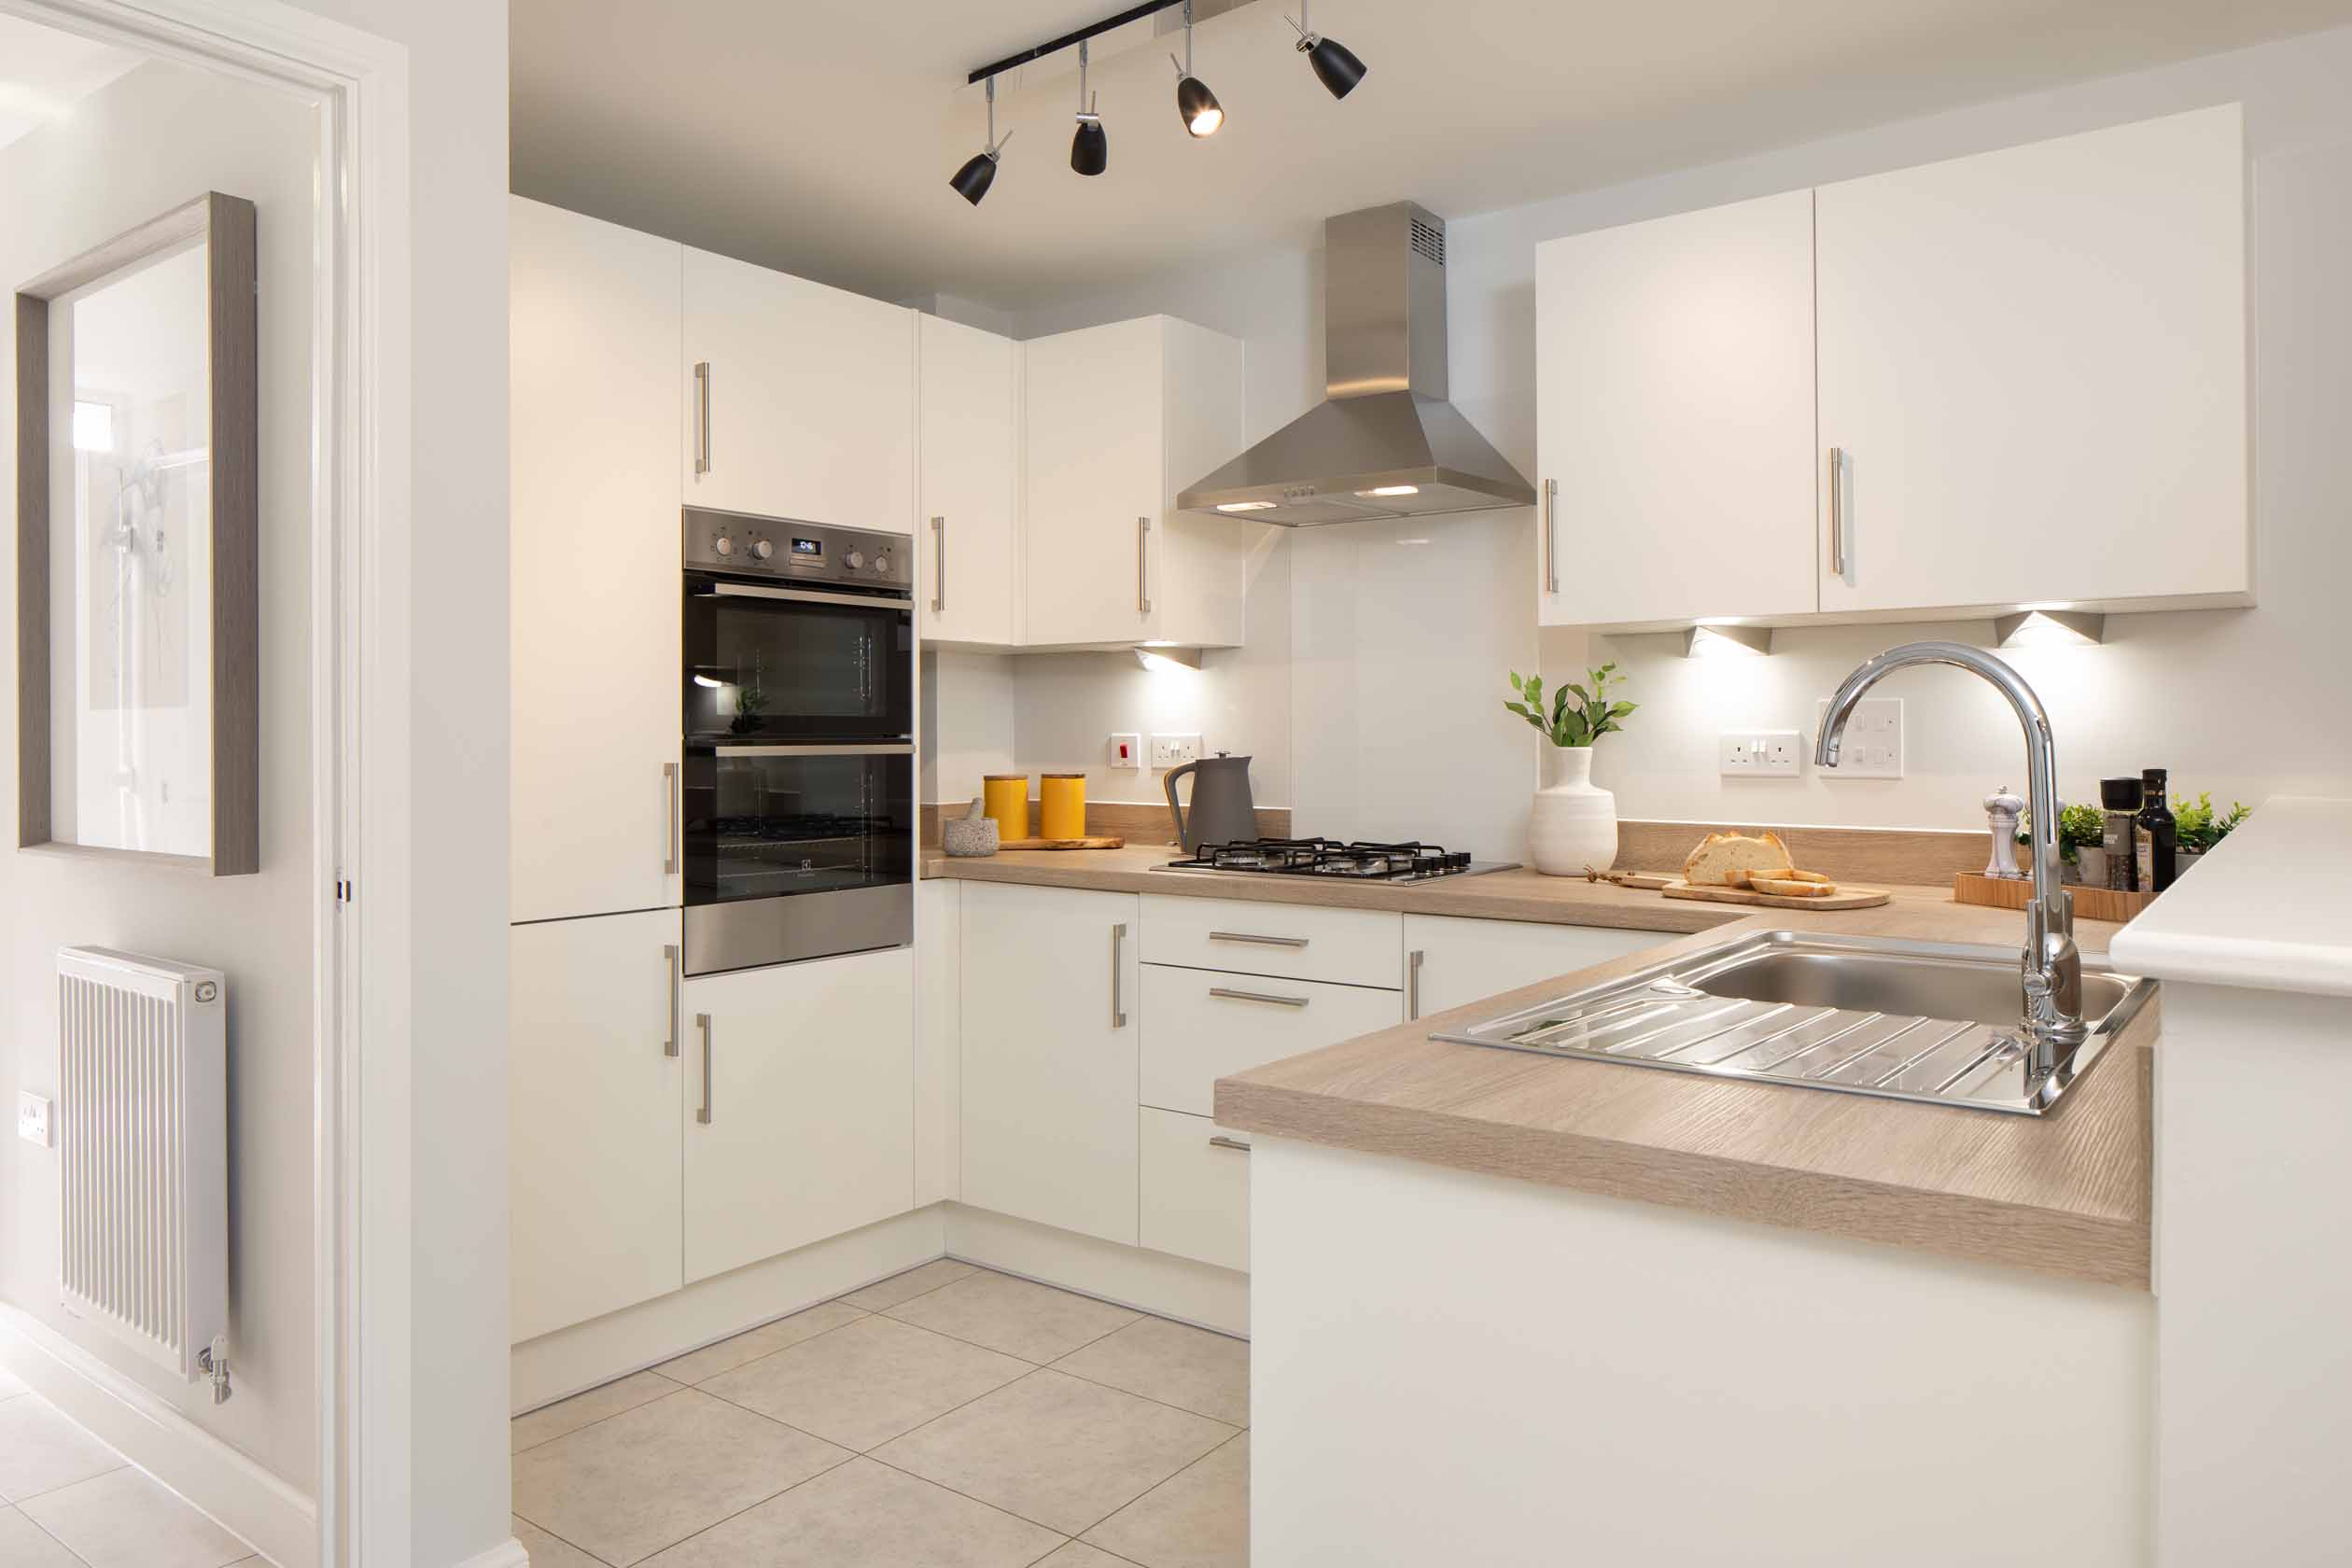 Property 2 of 9. Greenwood Internal Show Home Kitchen, Dwh, Orchard Green, Kingsbrook